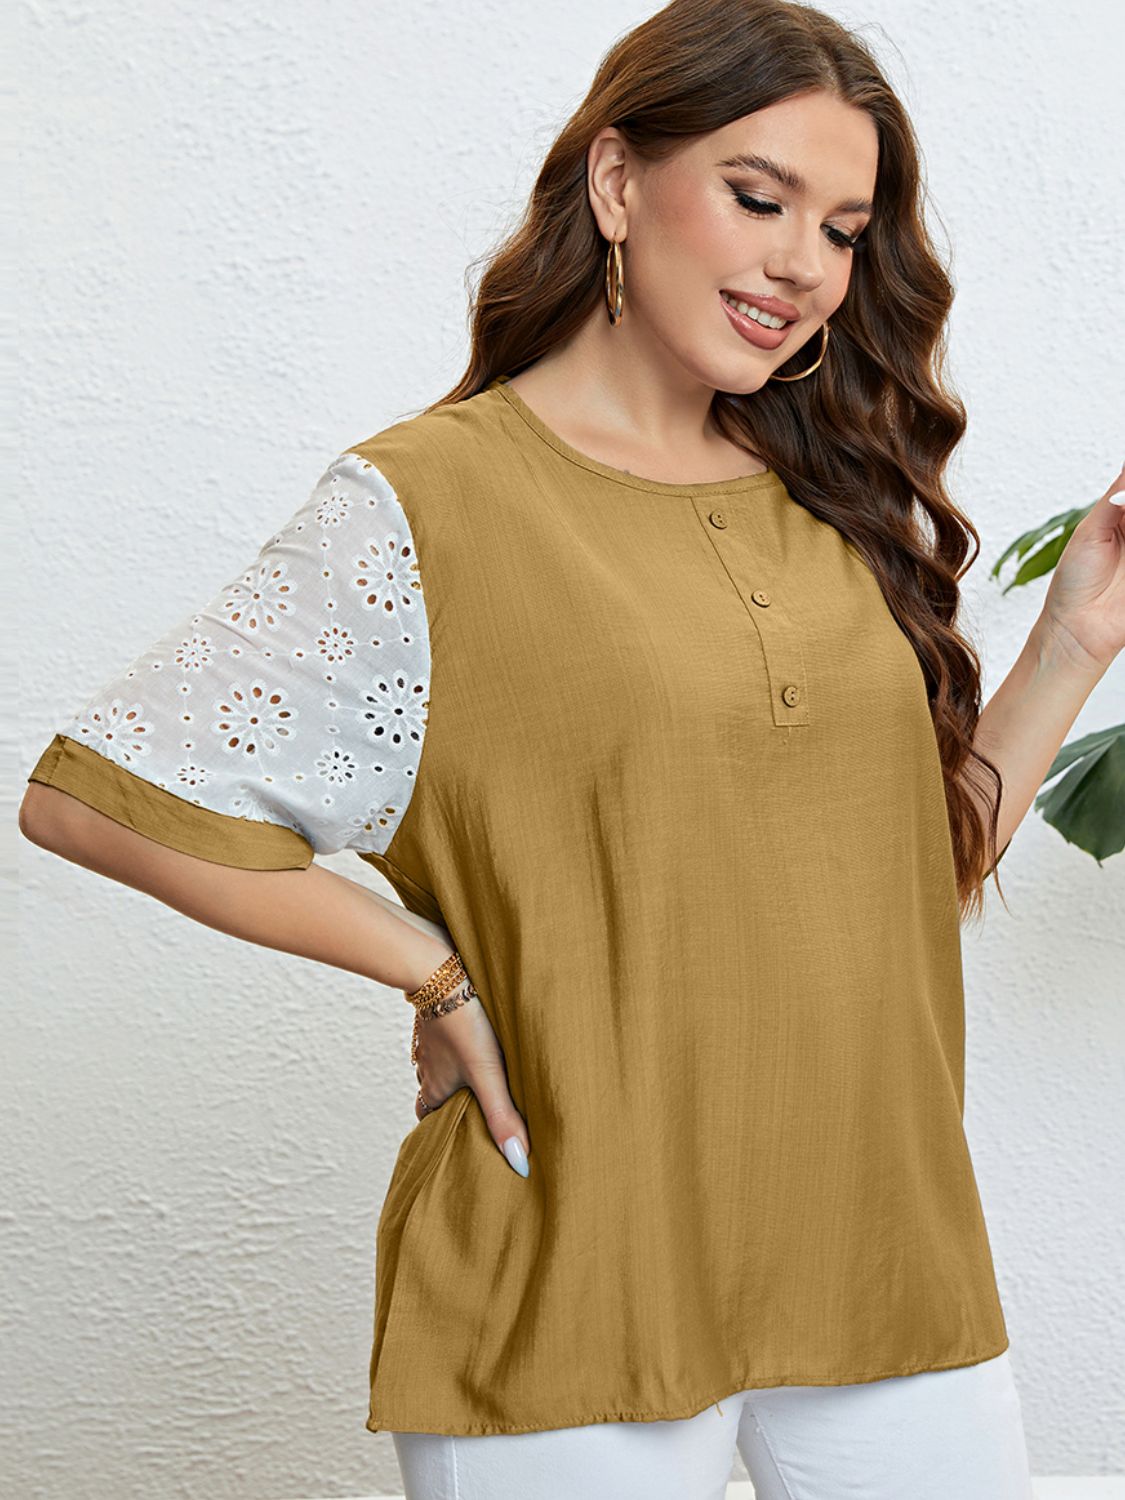 Plus Size Camel Colored Top with Contrast White laser cut short Sleeves